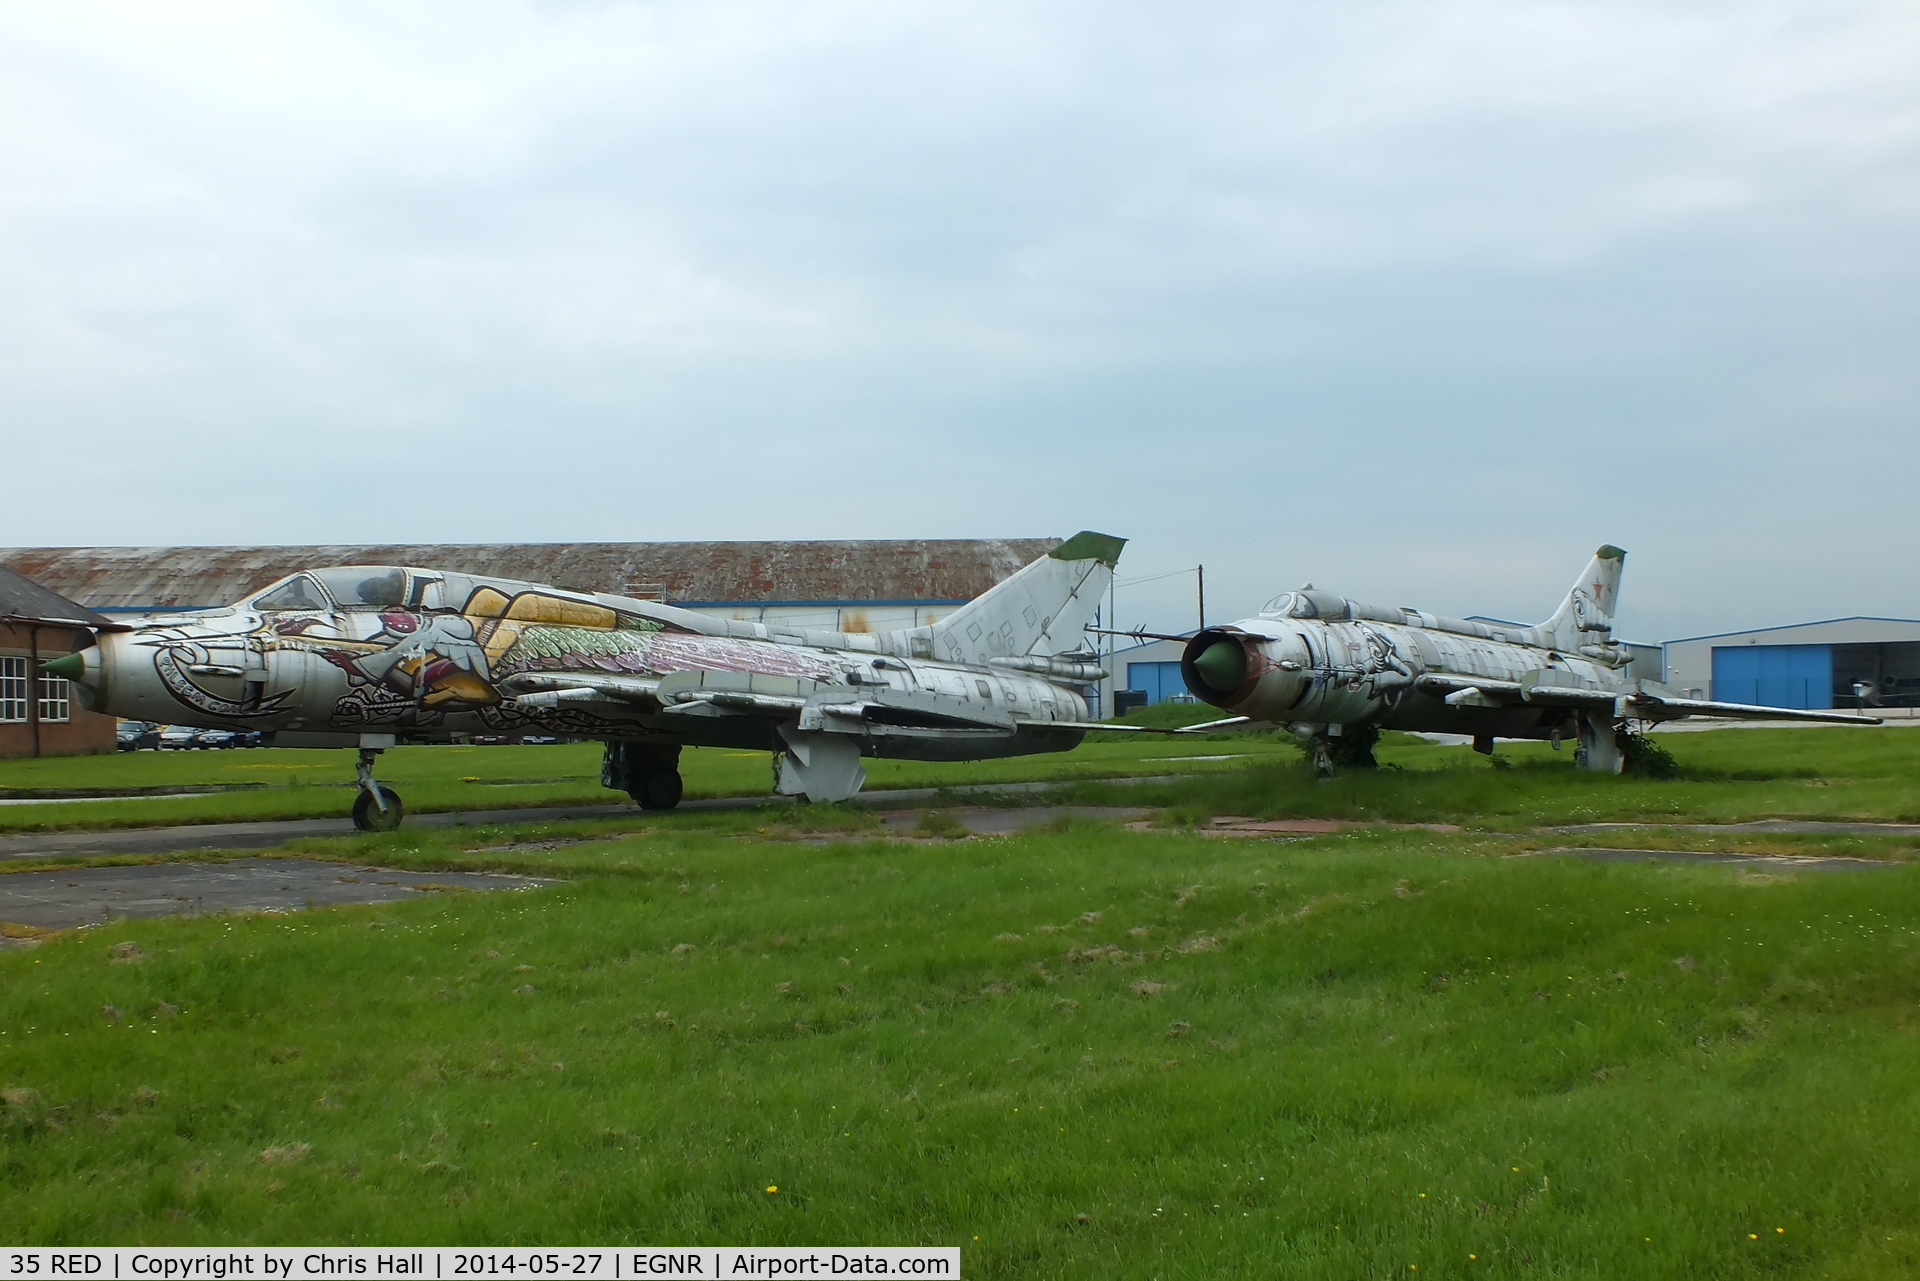 35 RED, Sukhoi Su-17M C/N 25102, with Sukhoi Su-17M fitter 54 RED behind it